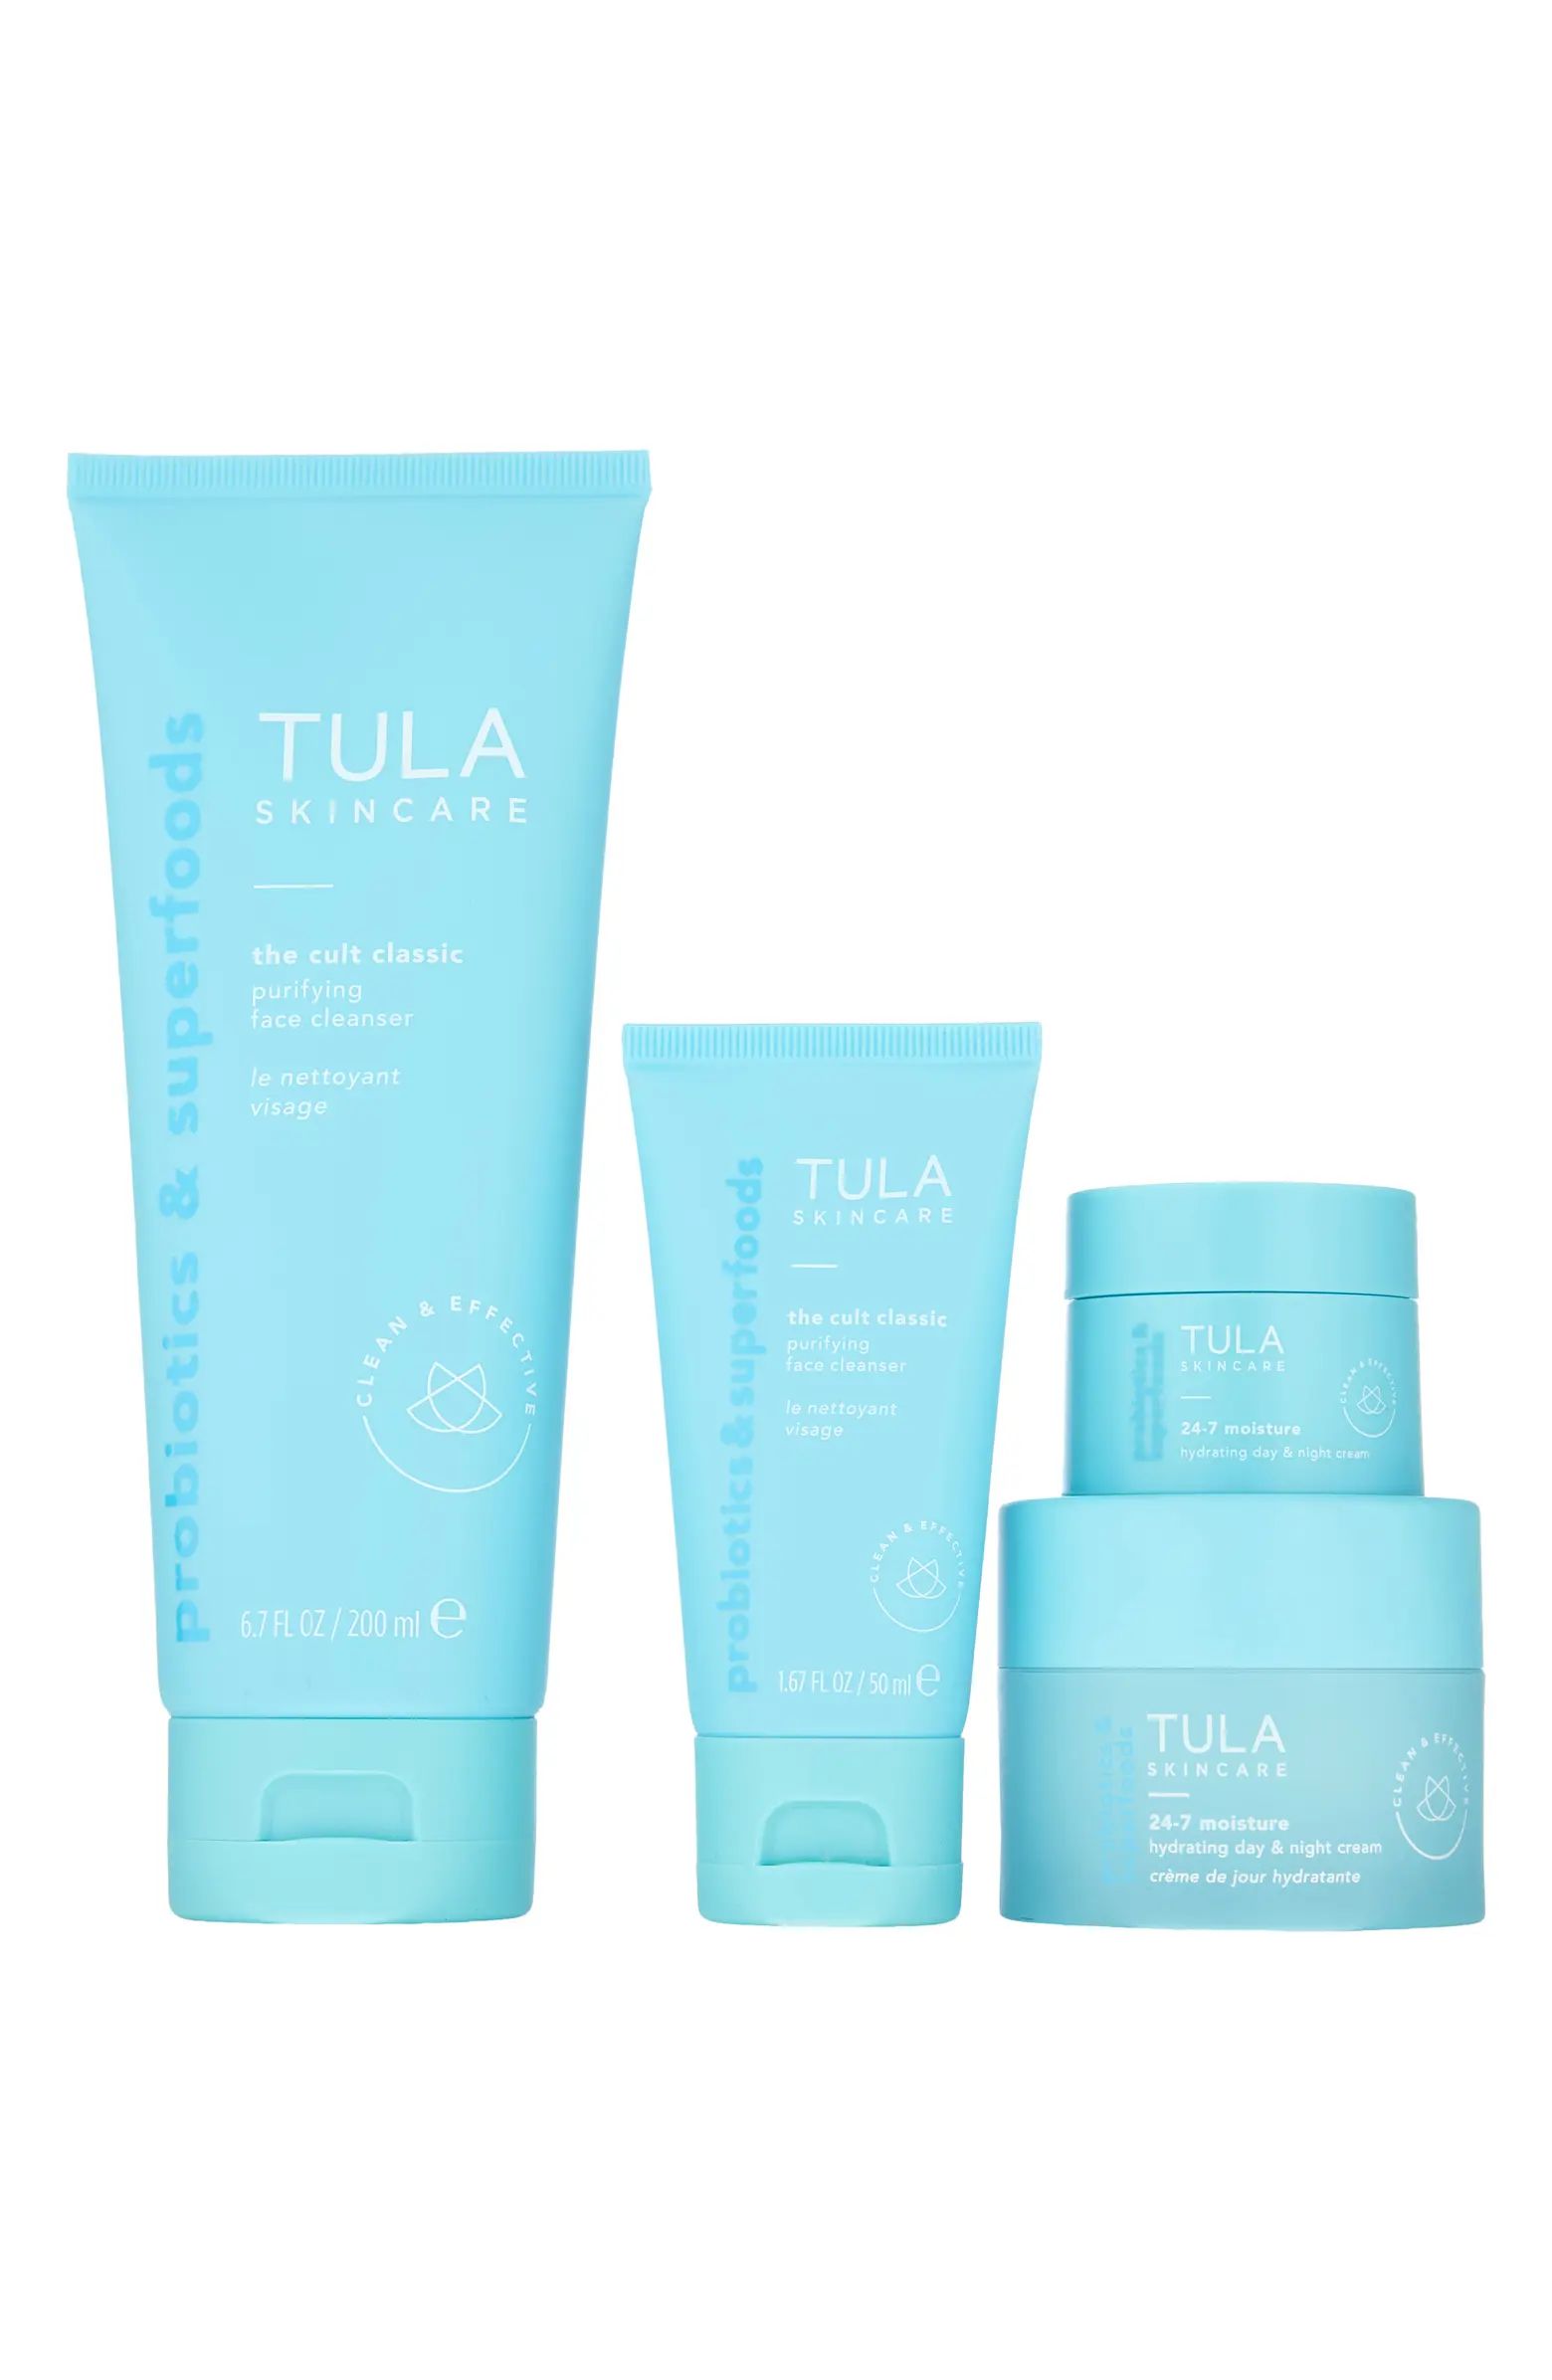 TULA Skincare The Power Couple Set $114 Value | Nordstrom | Nordstrom